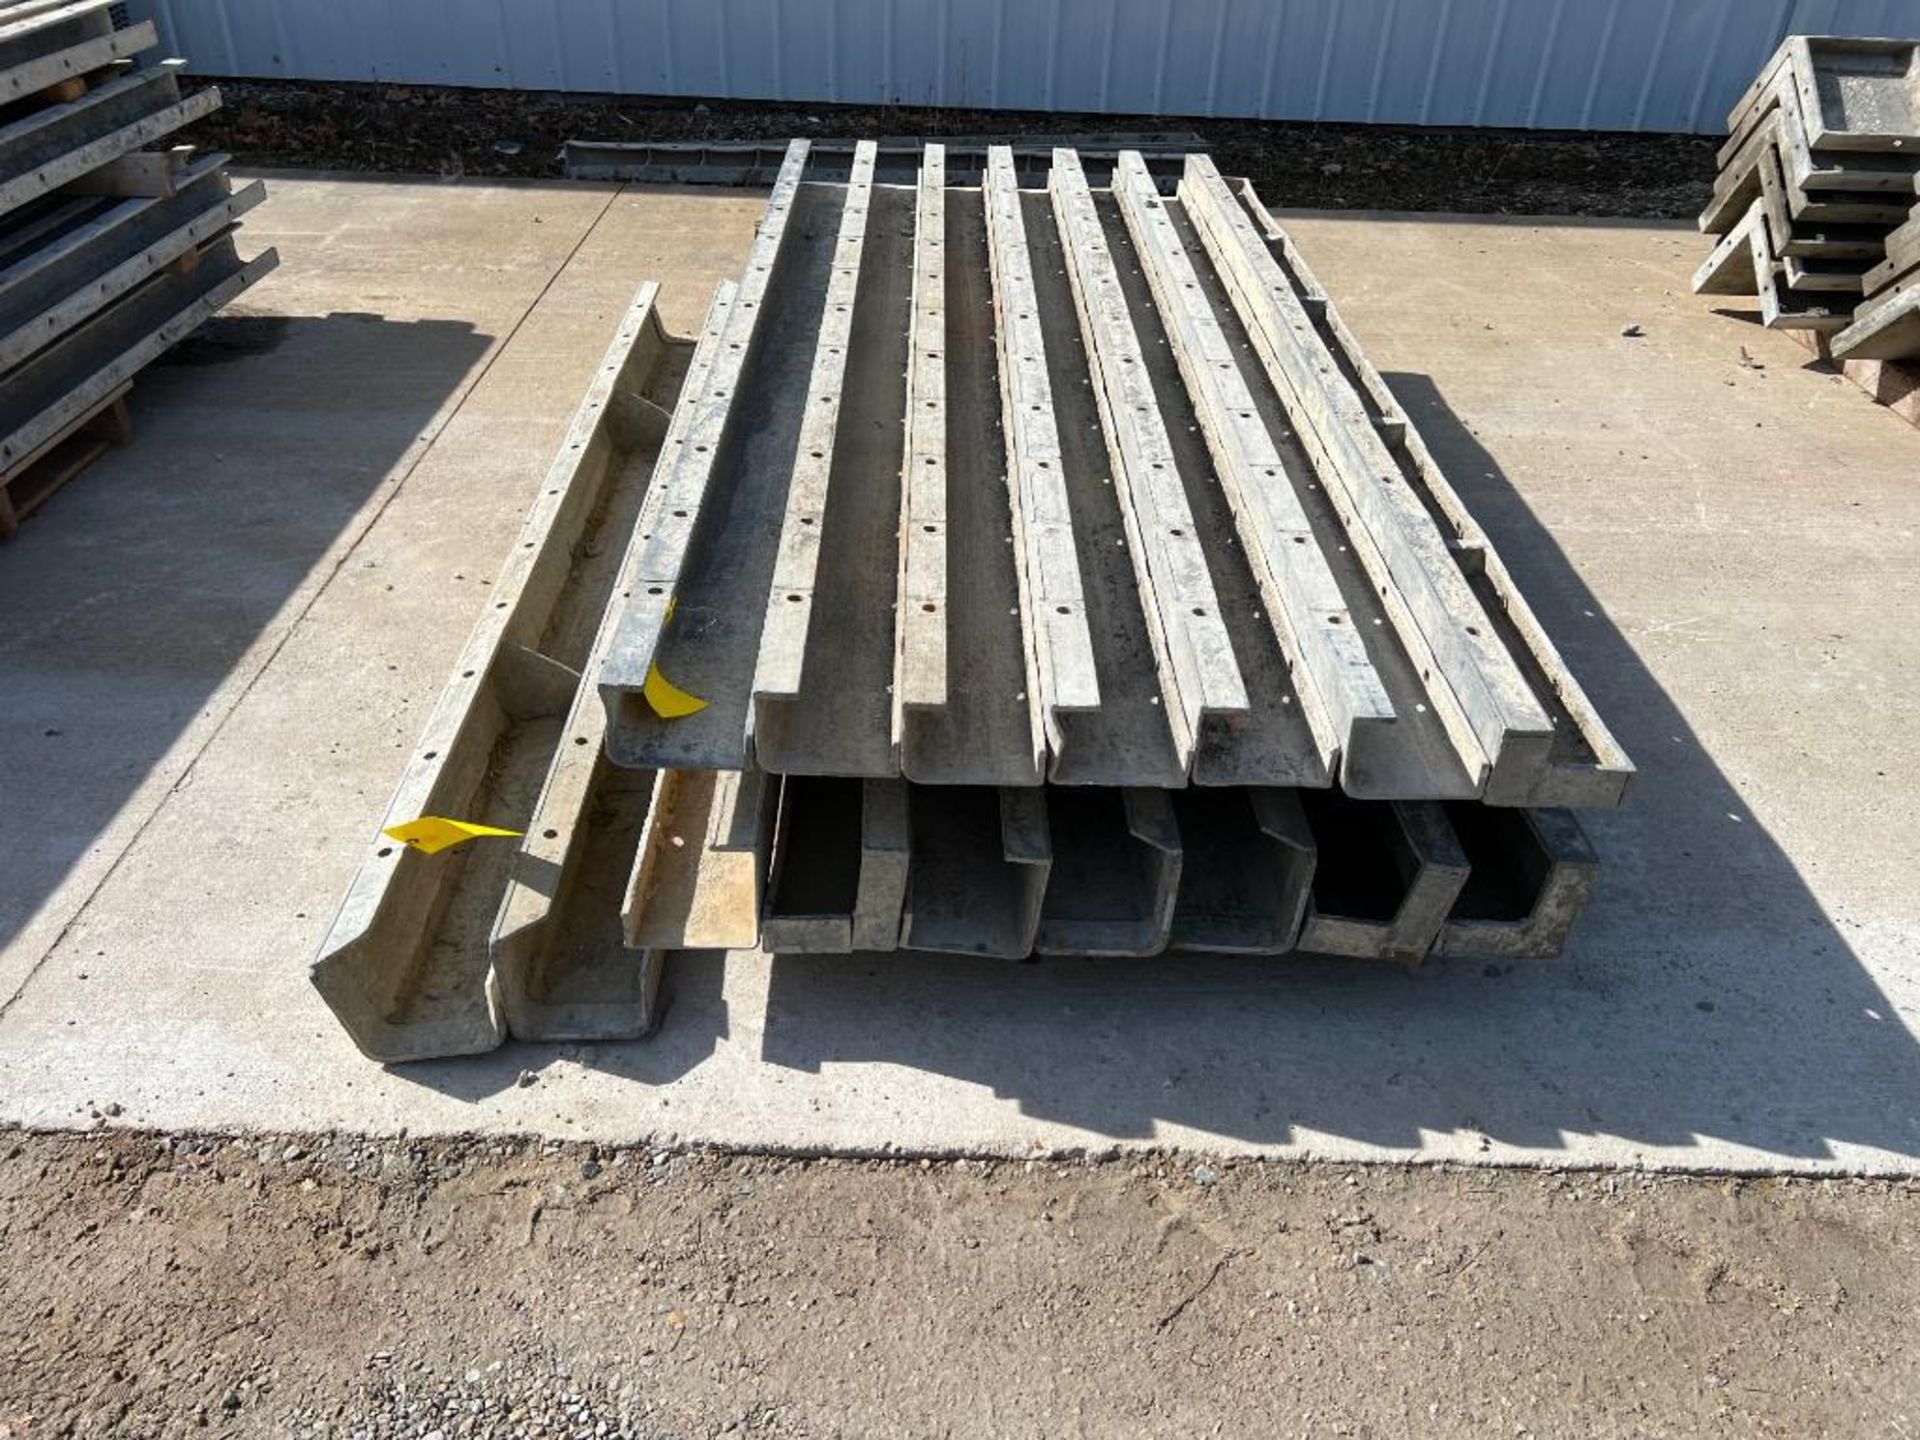 (9) 6" x 6" x 8' ISC Full Smooth Wall Ties Aluminum Concrete Forms, 8" Hole Pattern. Located in Mt.